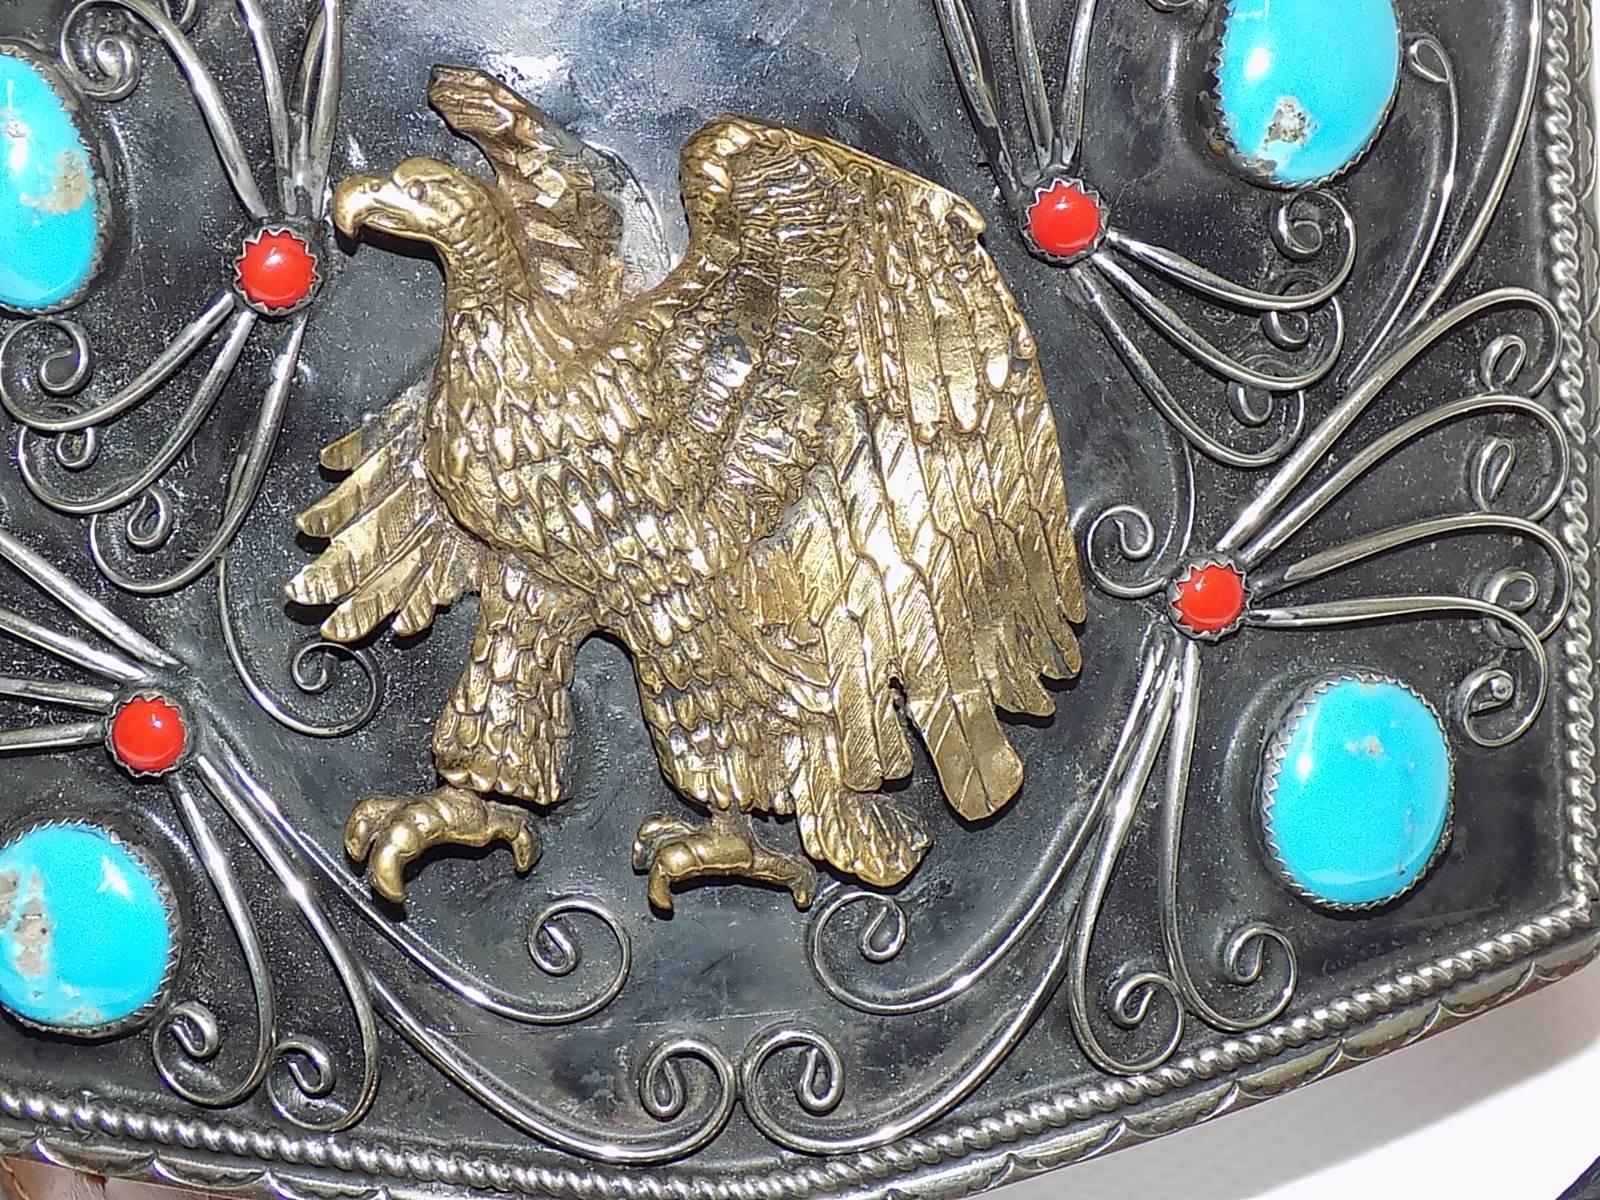 Cowboy legends massive silver hand crafted belt w turquoise /eagle buckle 1